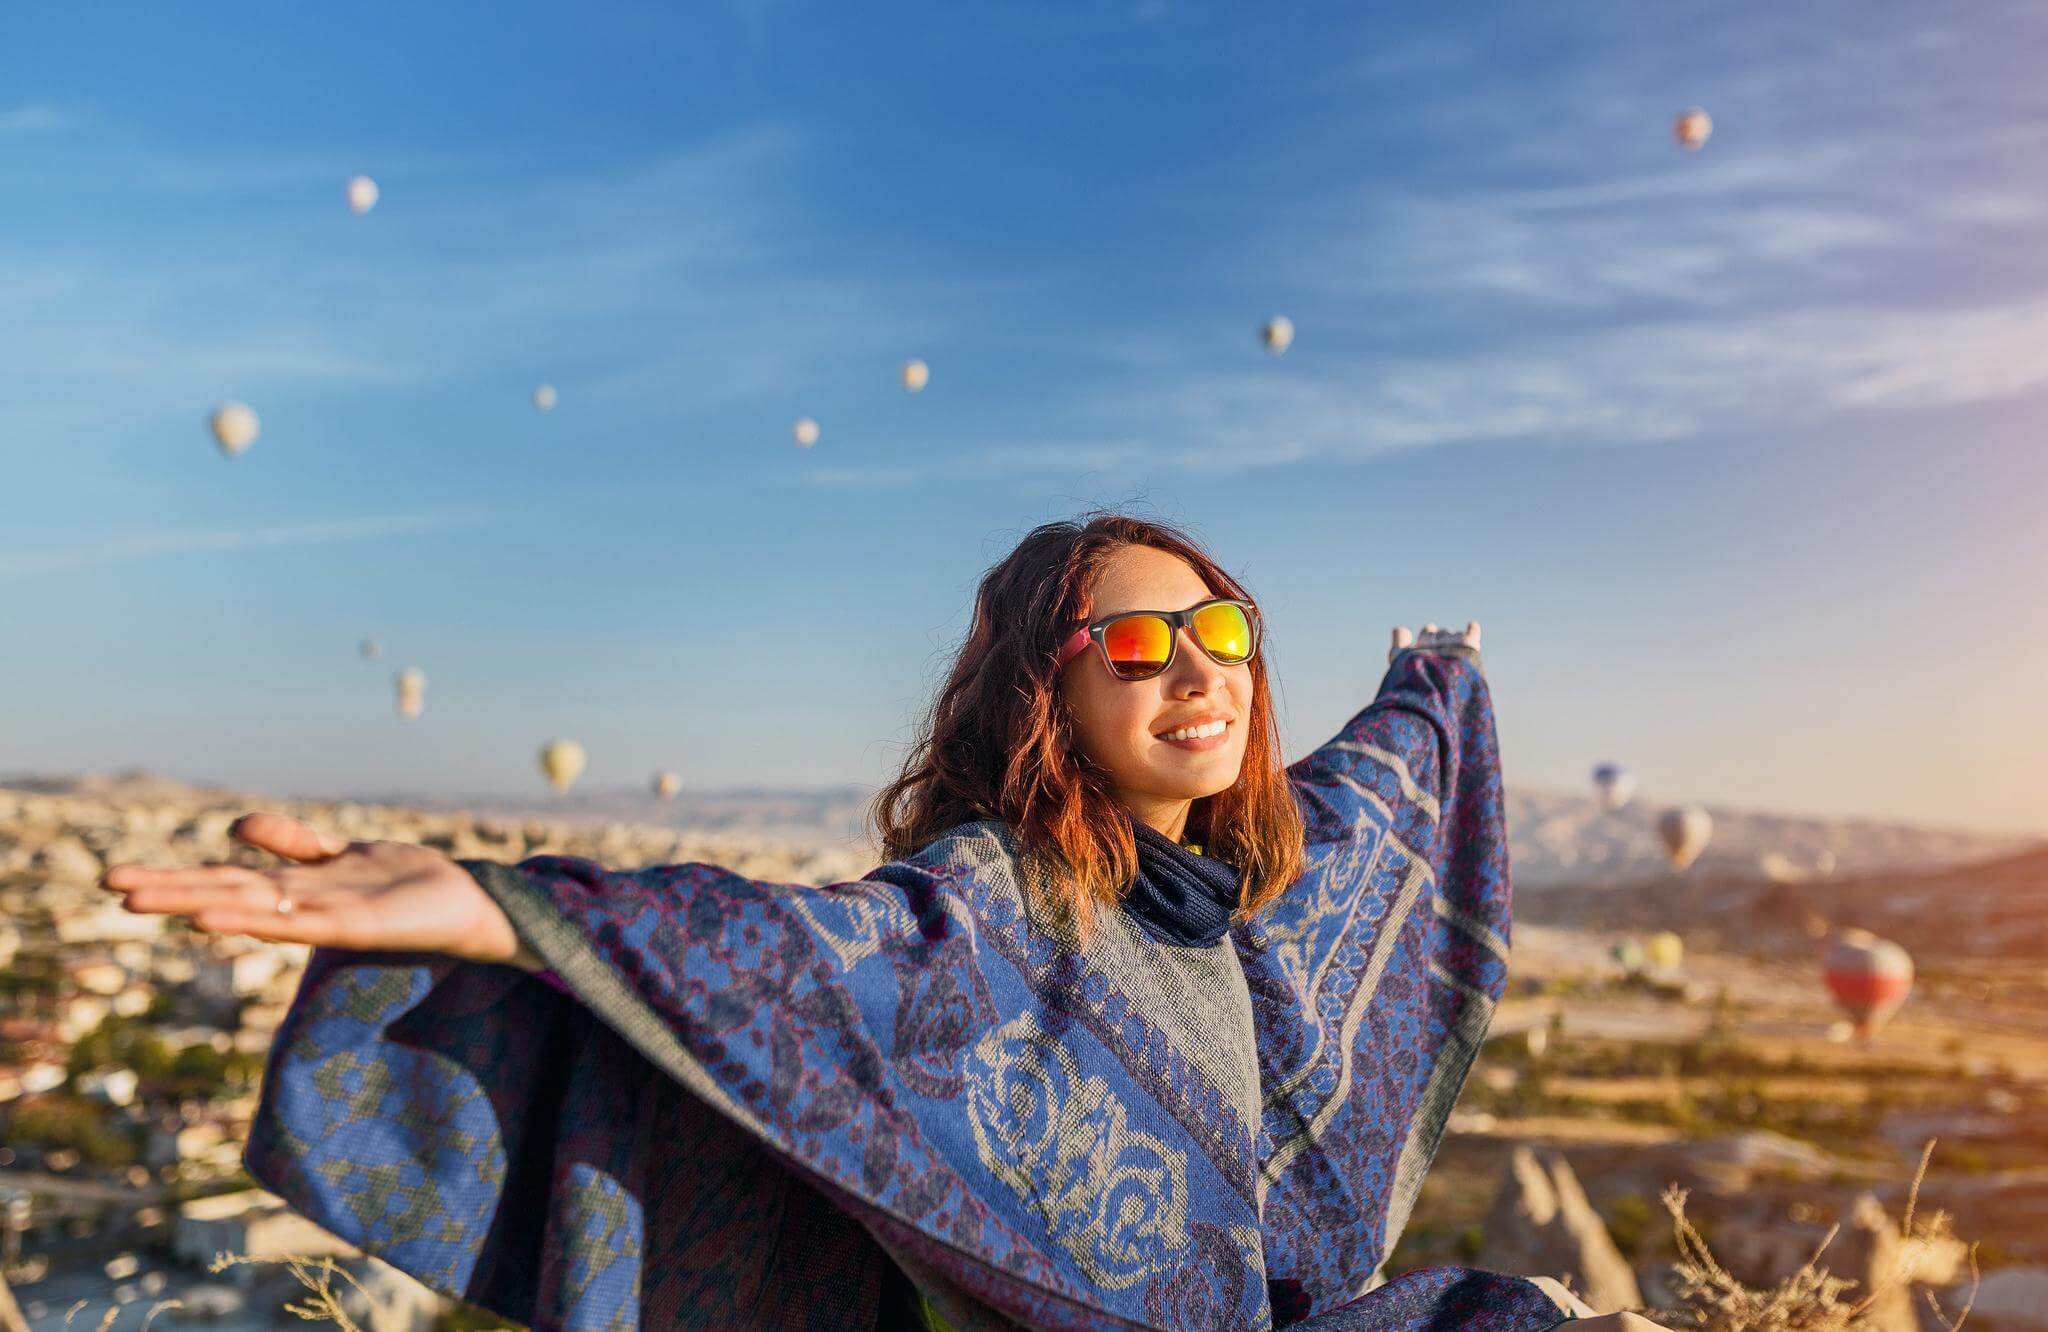 happy female traveler in shawl smiling and extending arms to the sky with hot air balloons in background